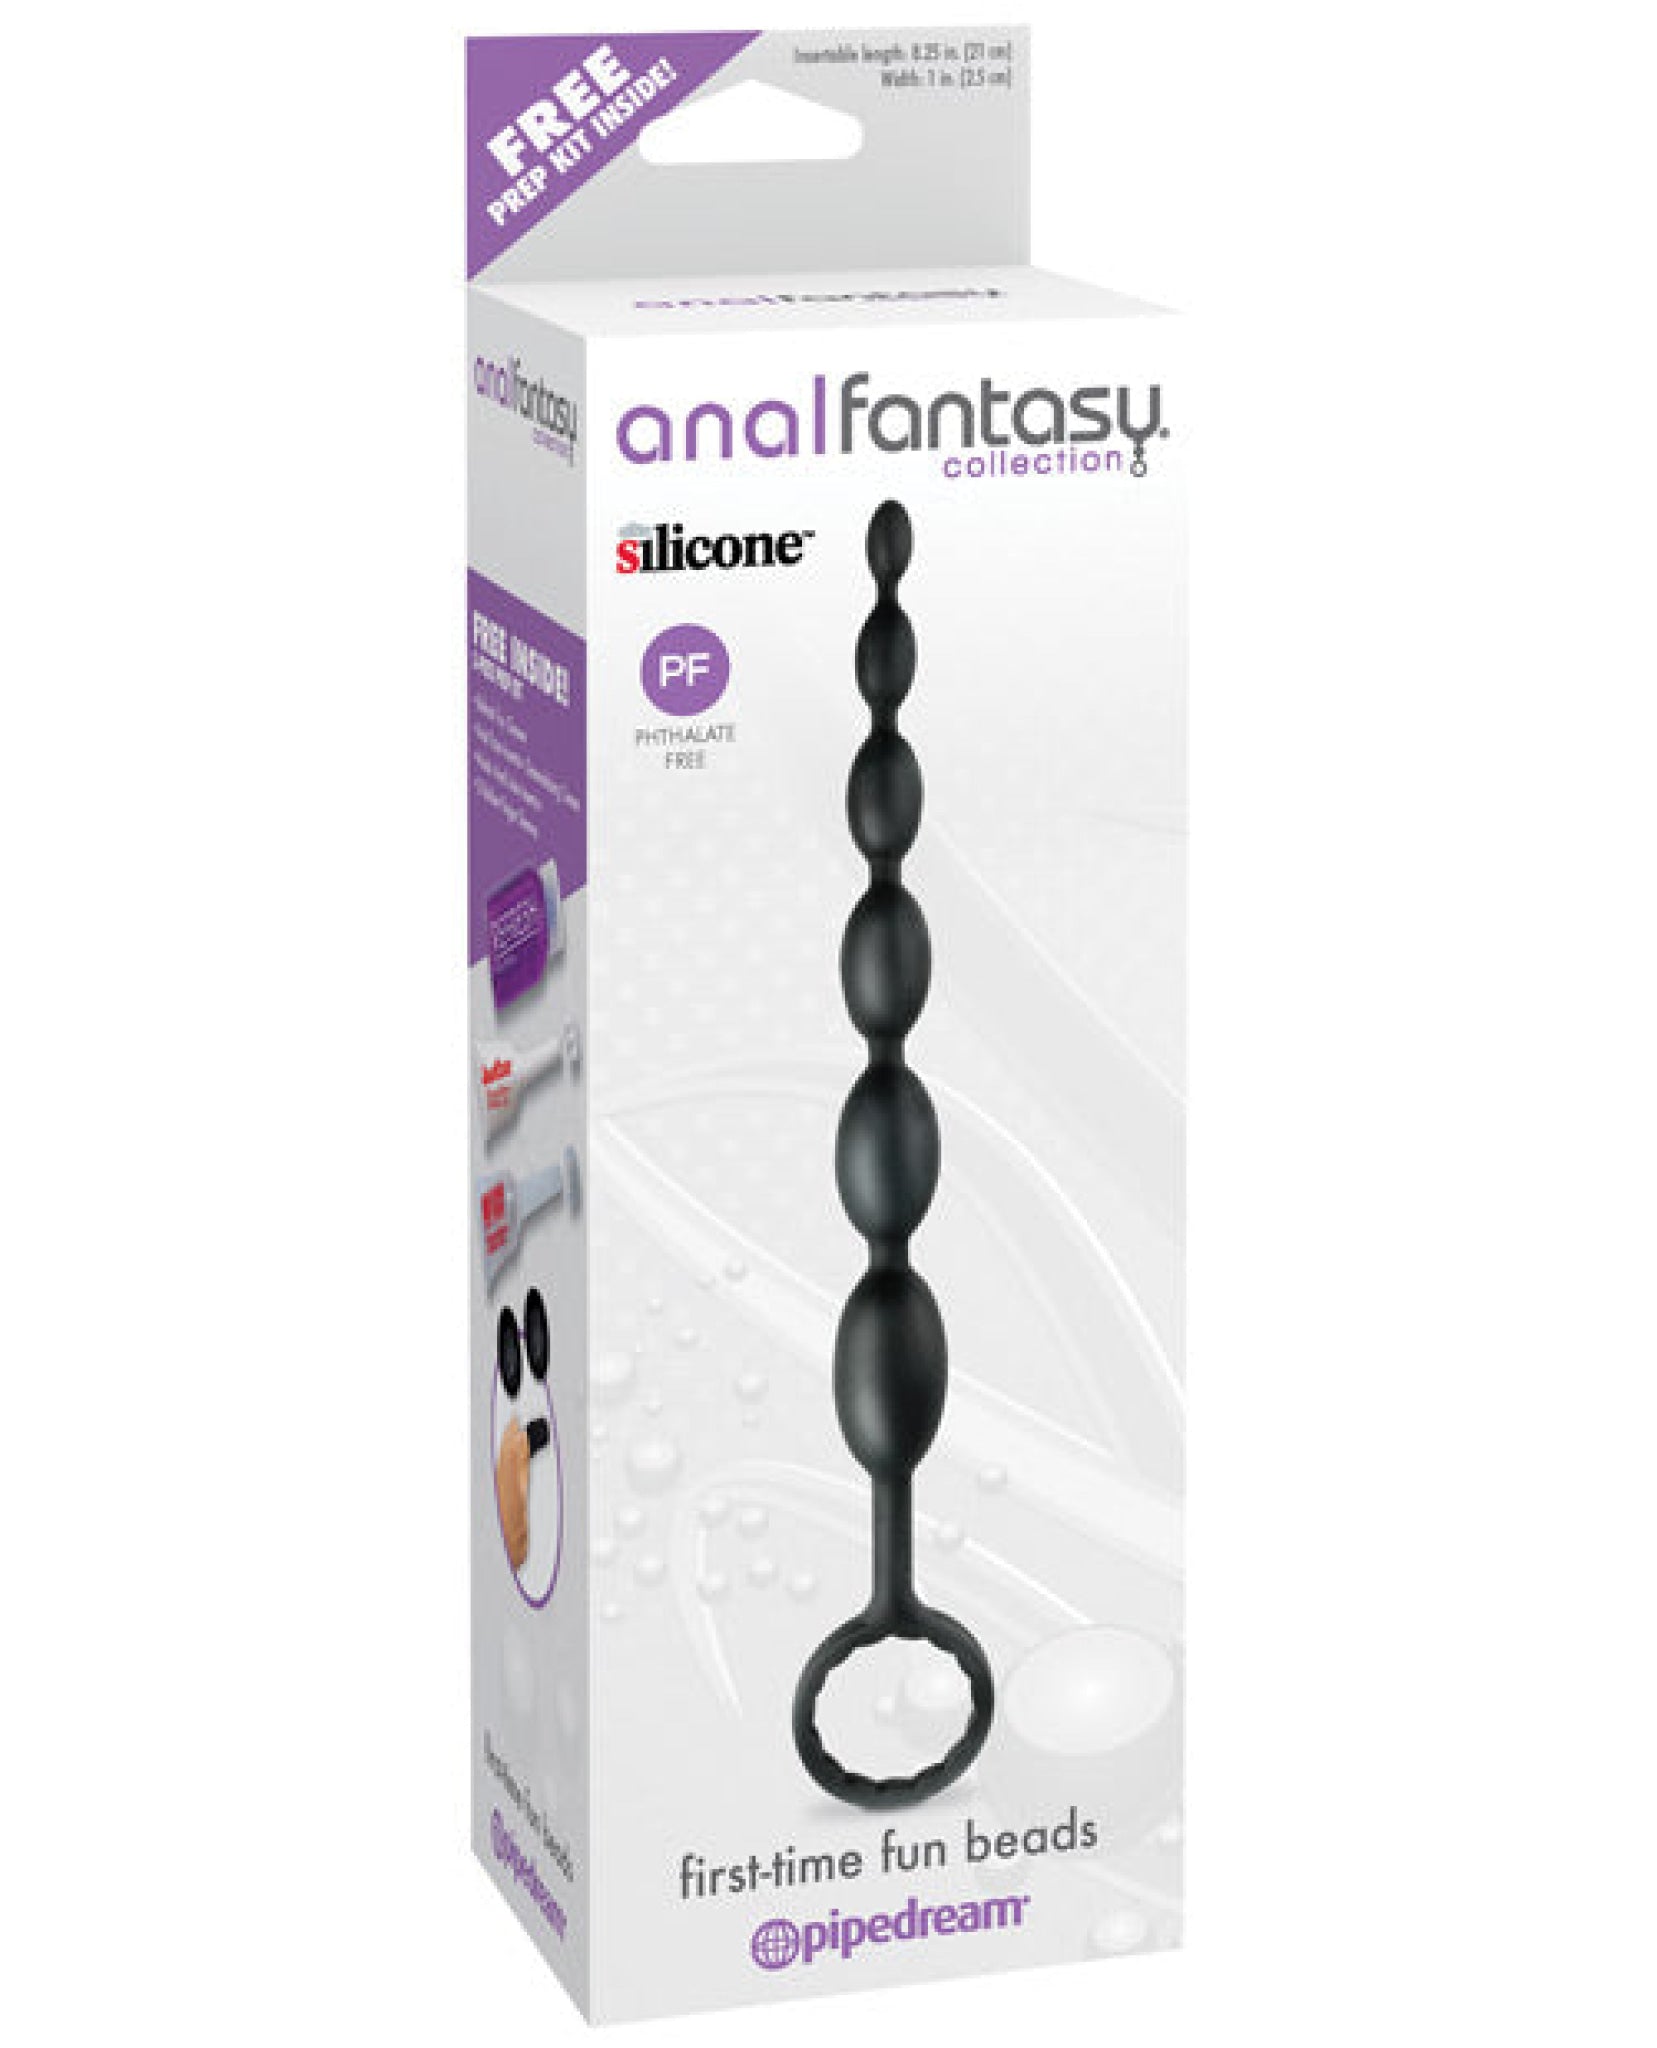 Anal Fantasy Collection First Time Fun Beads Pipedream®